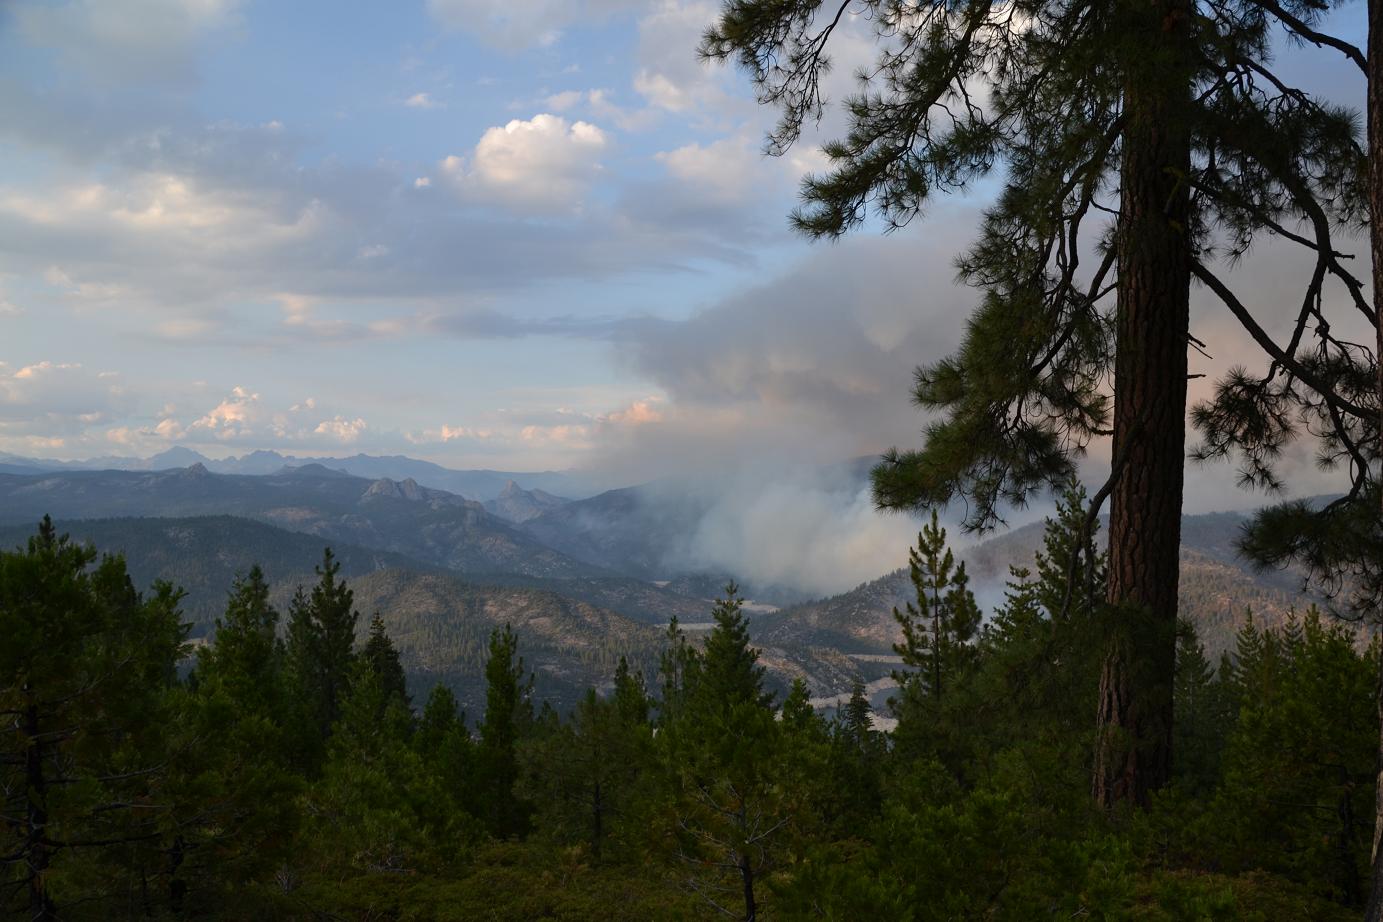 Northern part of fire from Mile High - photo Gina Clugston